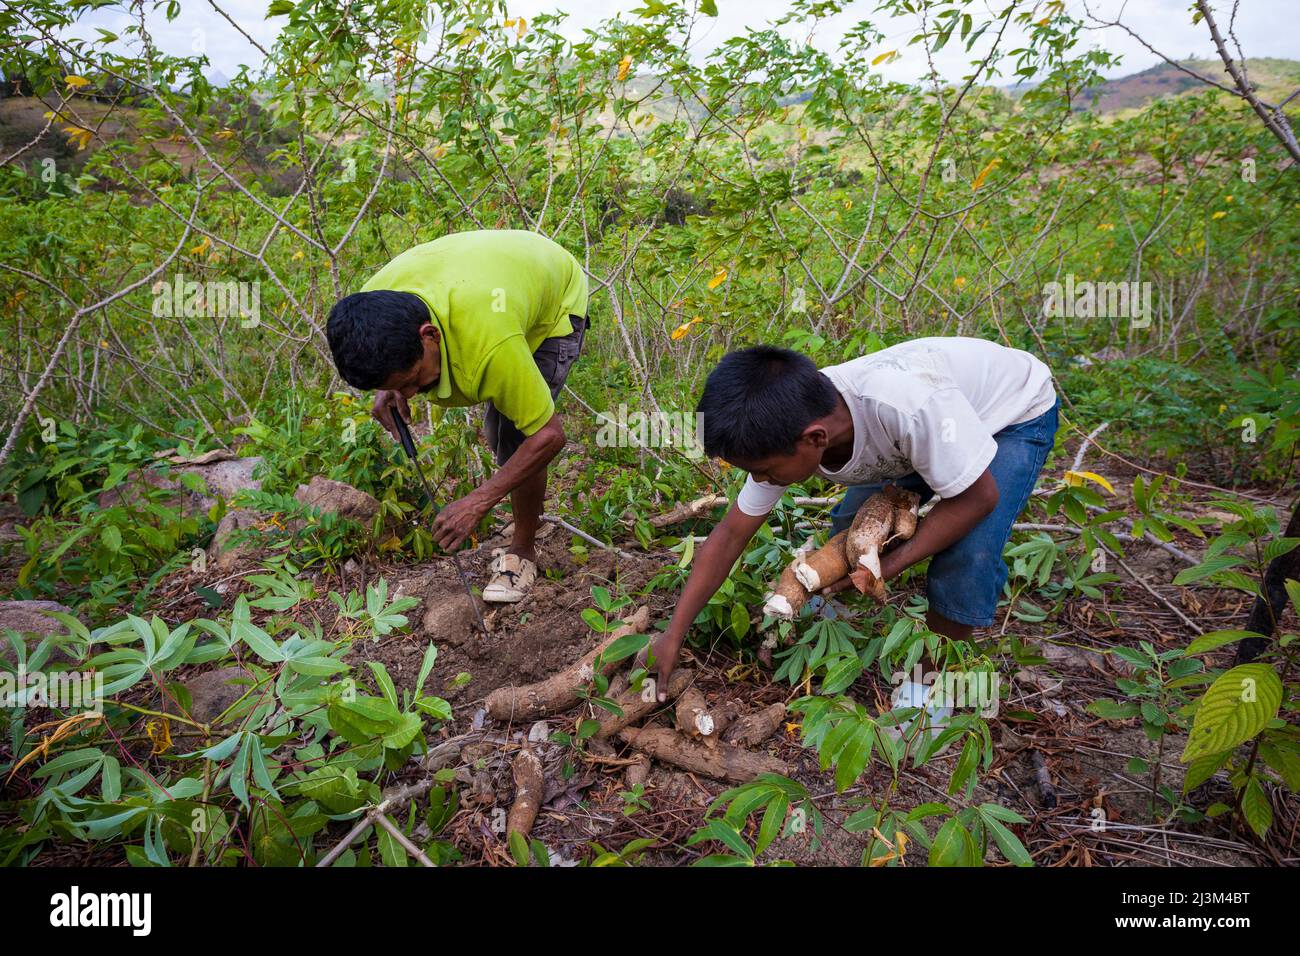 Father and son harvest yuca roots in Las Minas de Tulu in Cocle province, Republic of Panama, Central America. Stock Photo